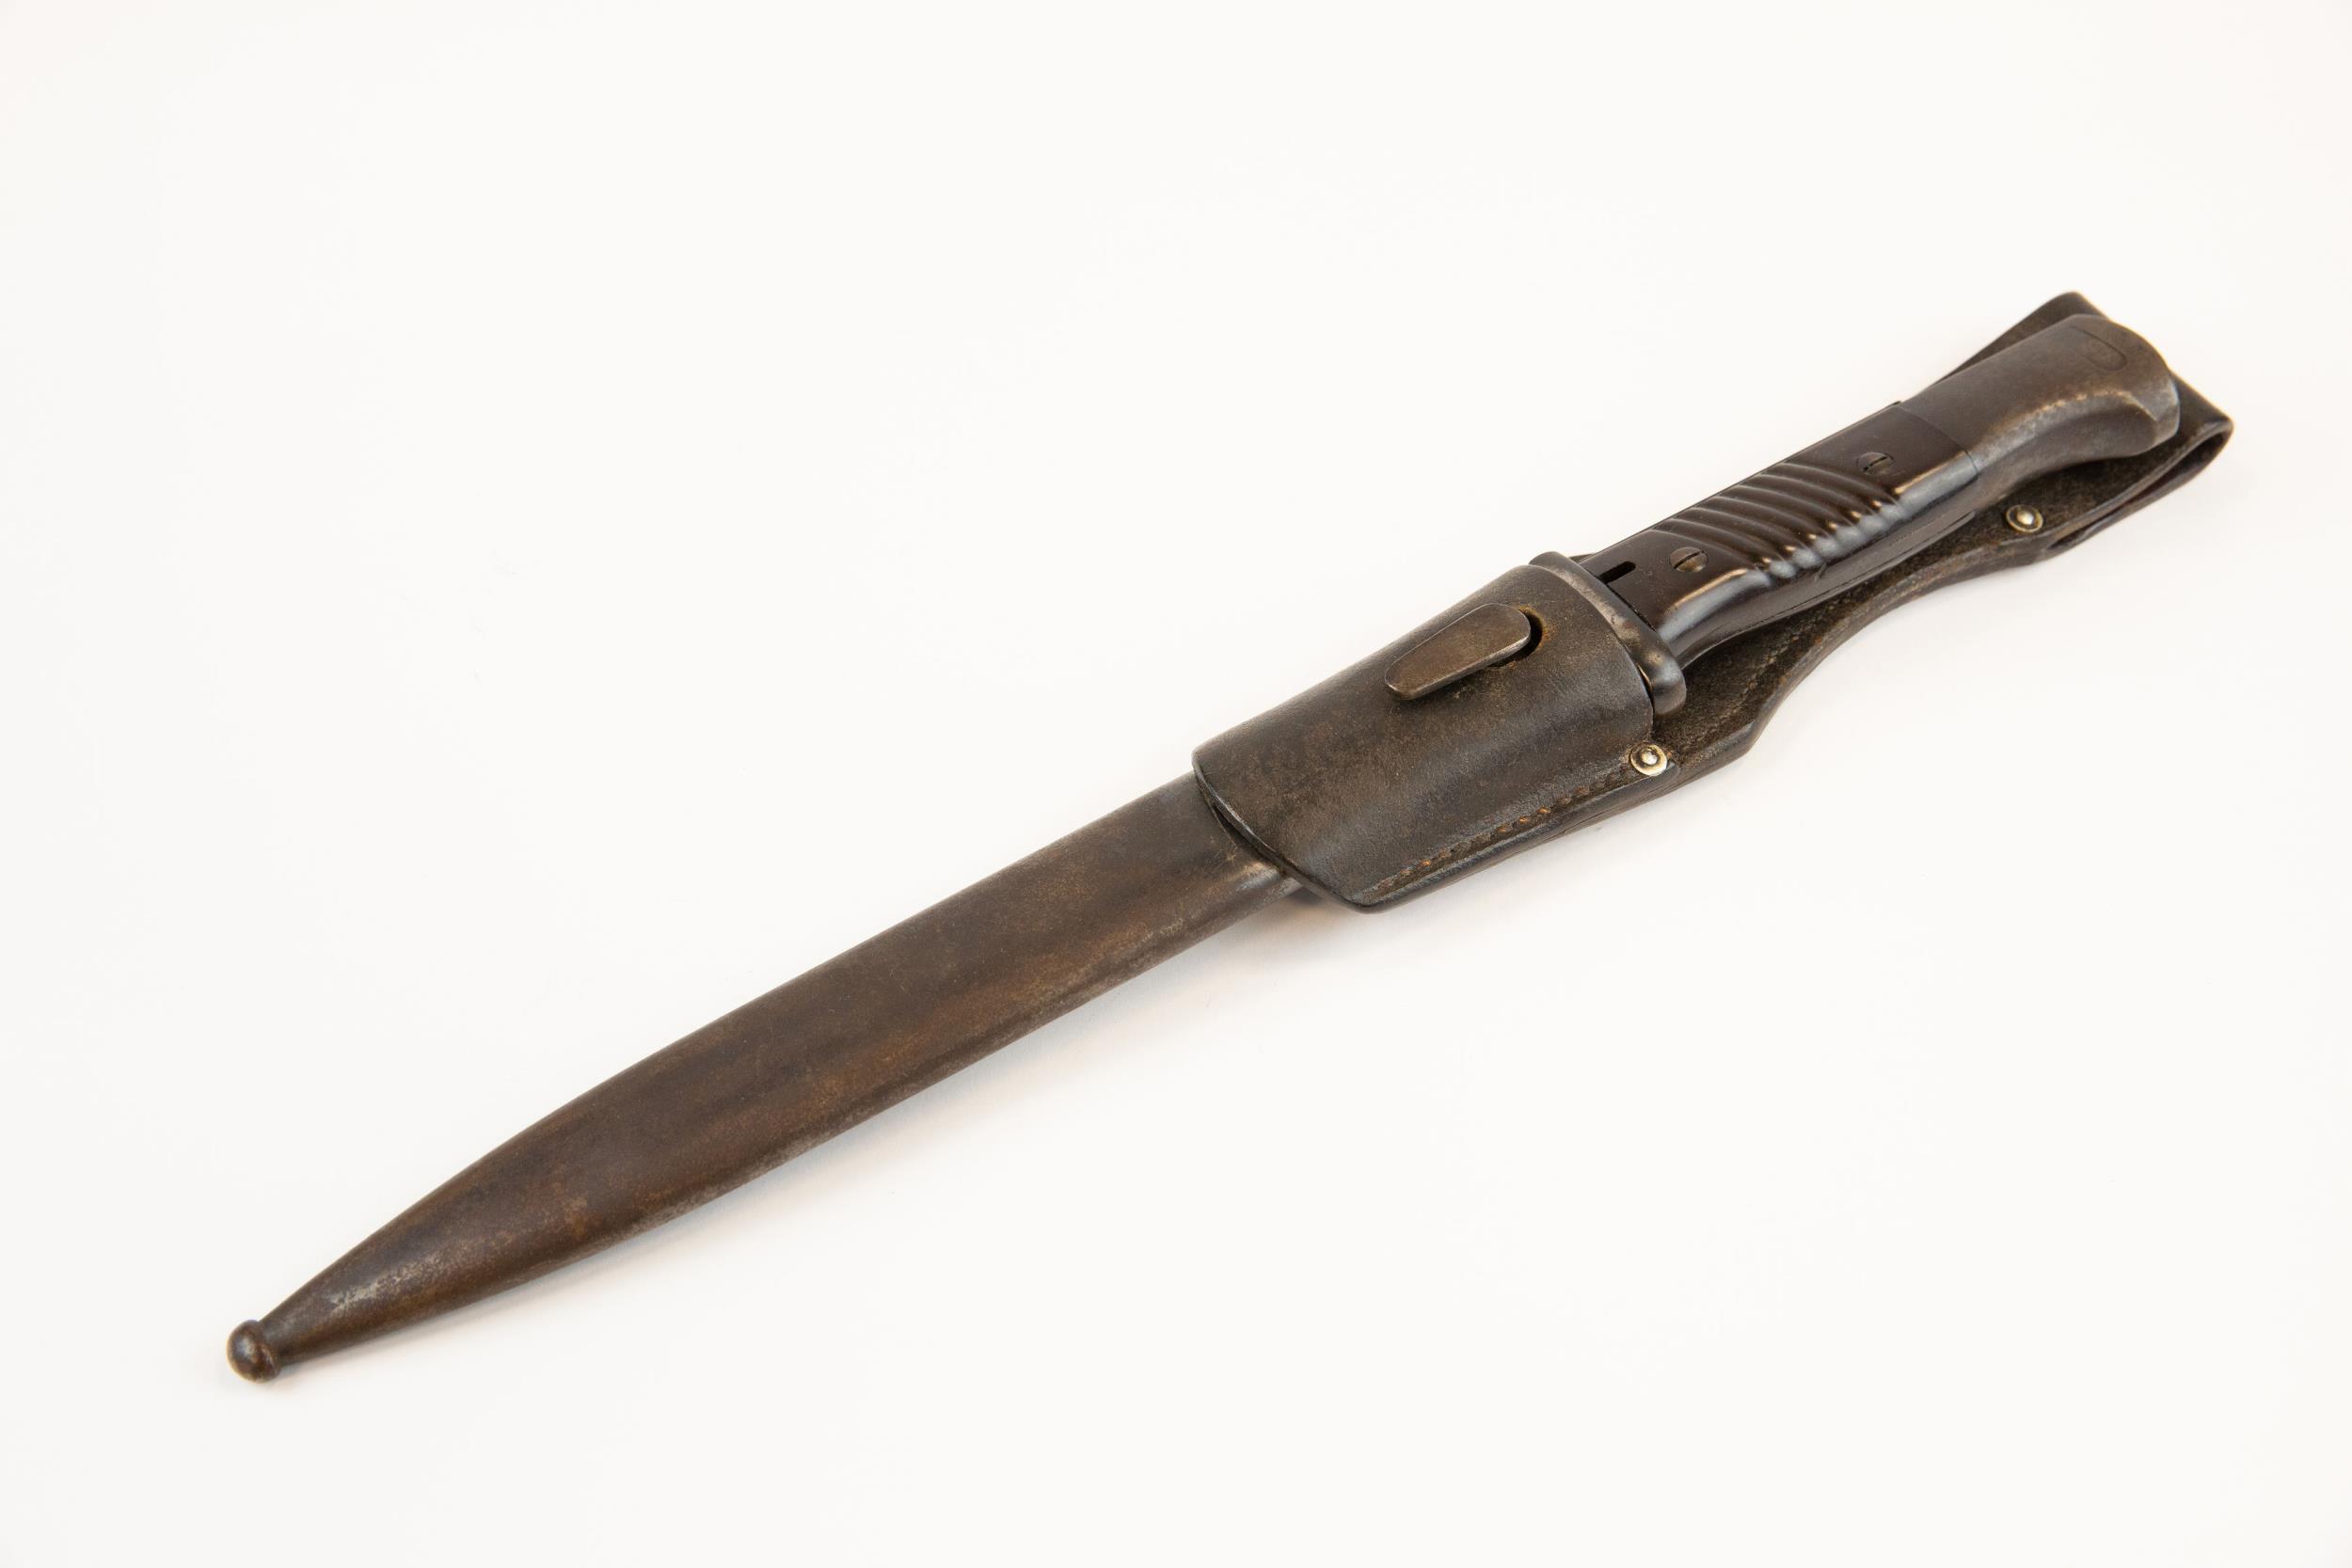 A WWII German K98 bayonet, with brown bakelite grips, in its scabbard with leather frog, the bayonet